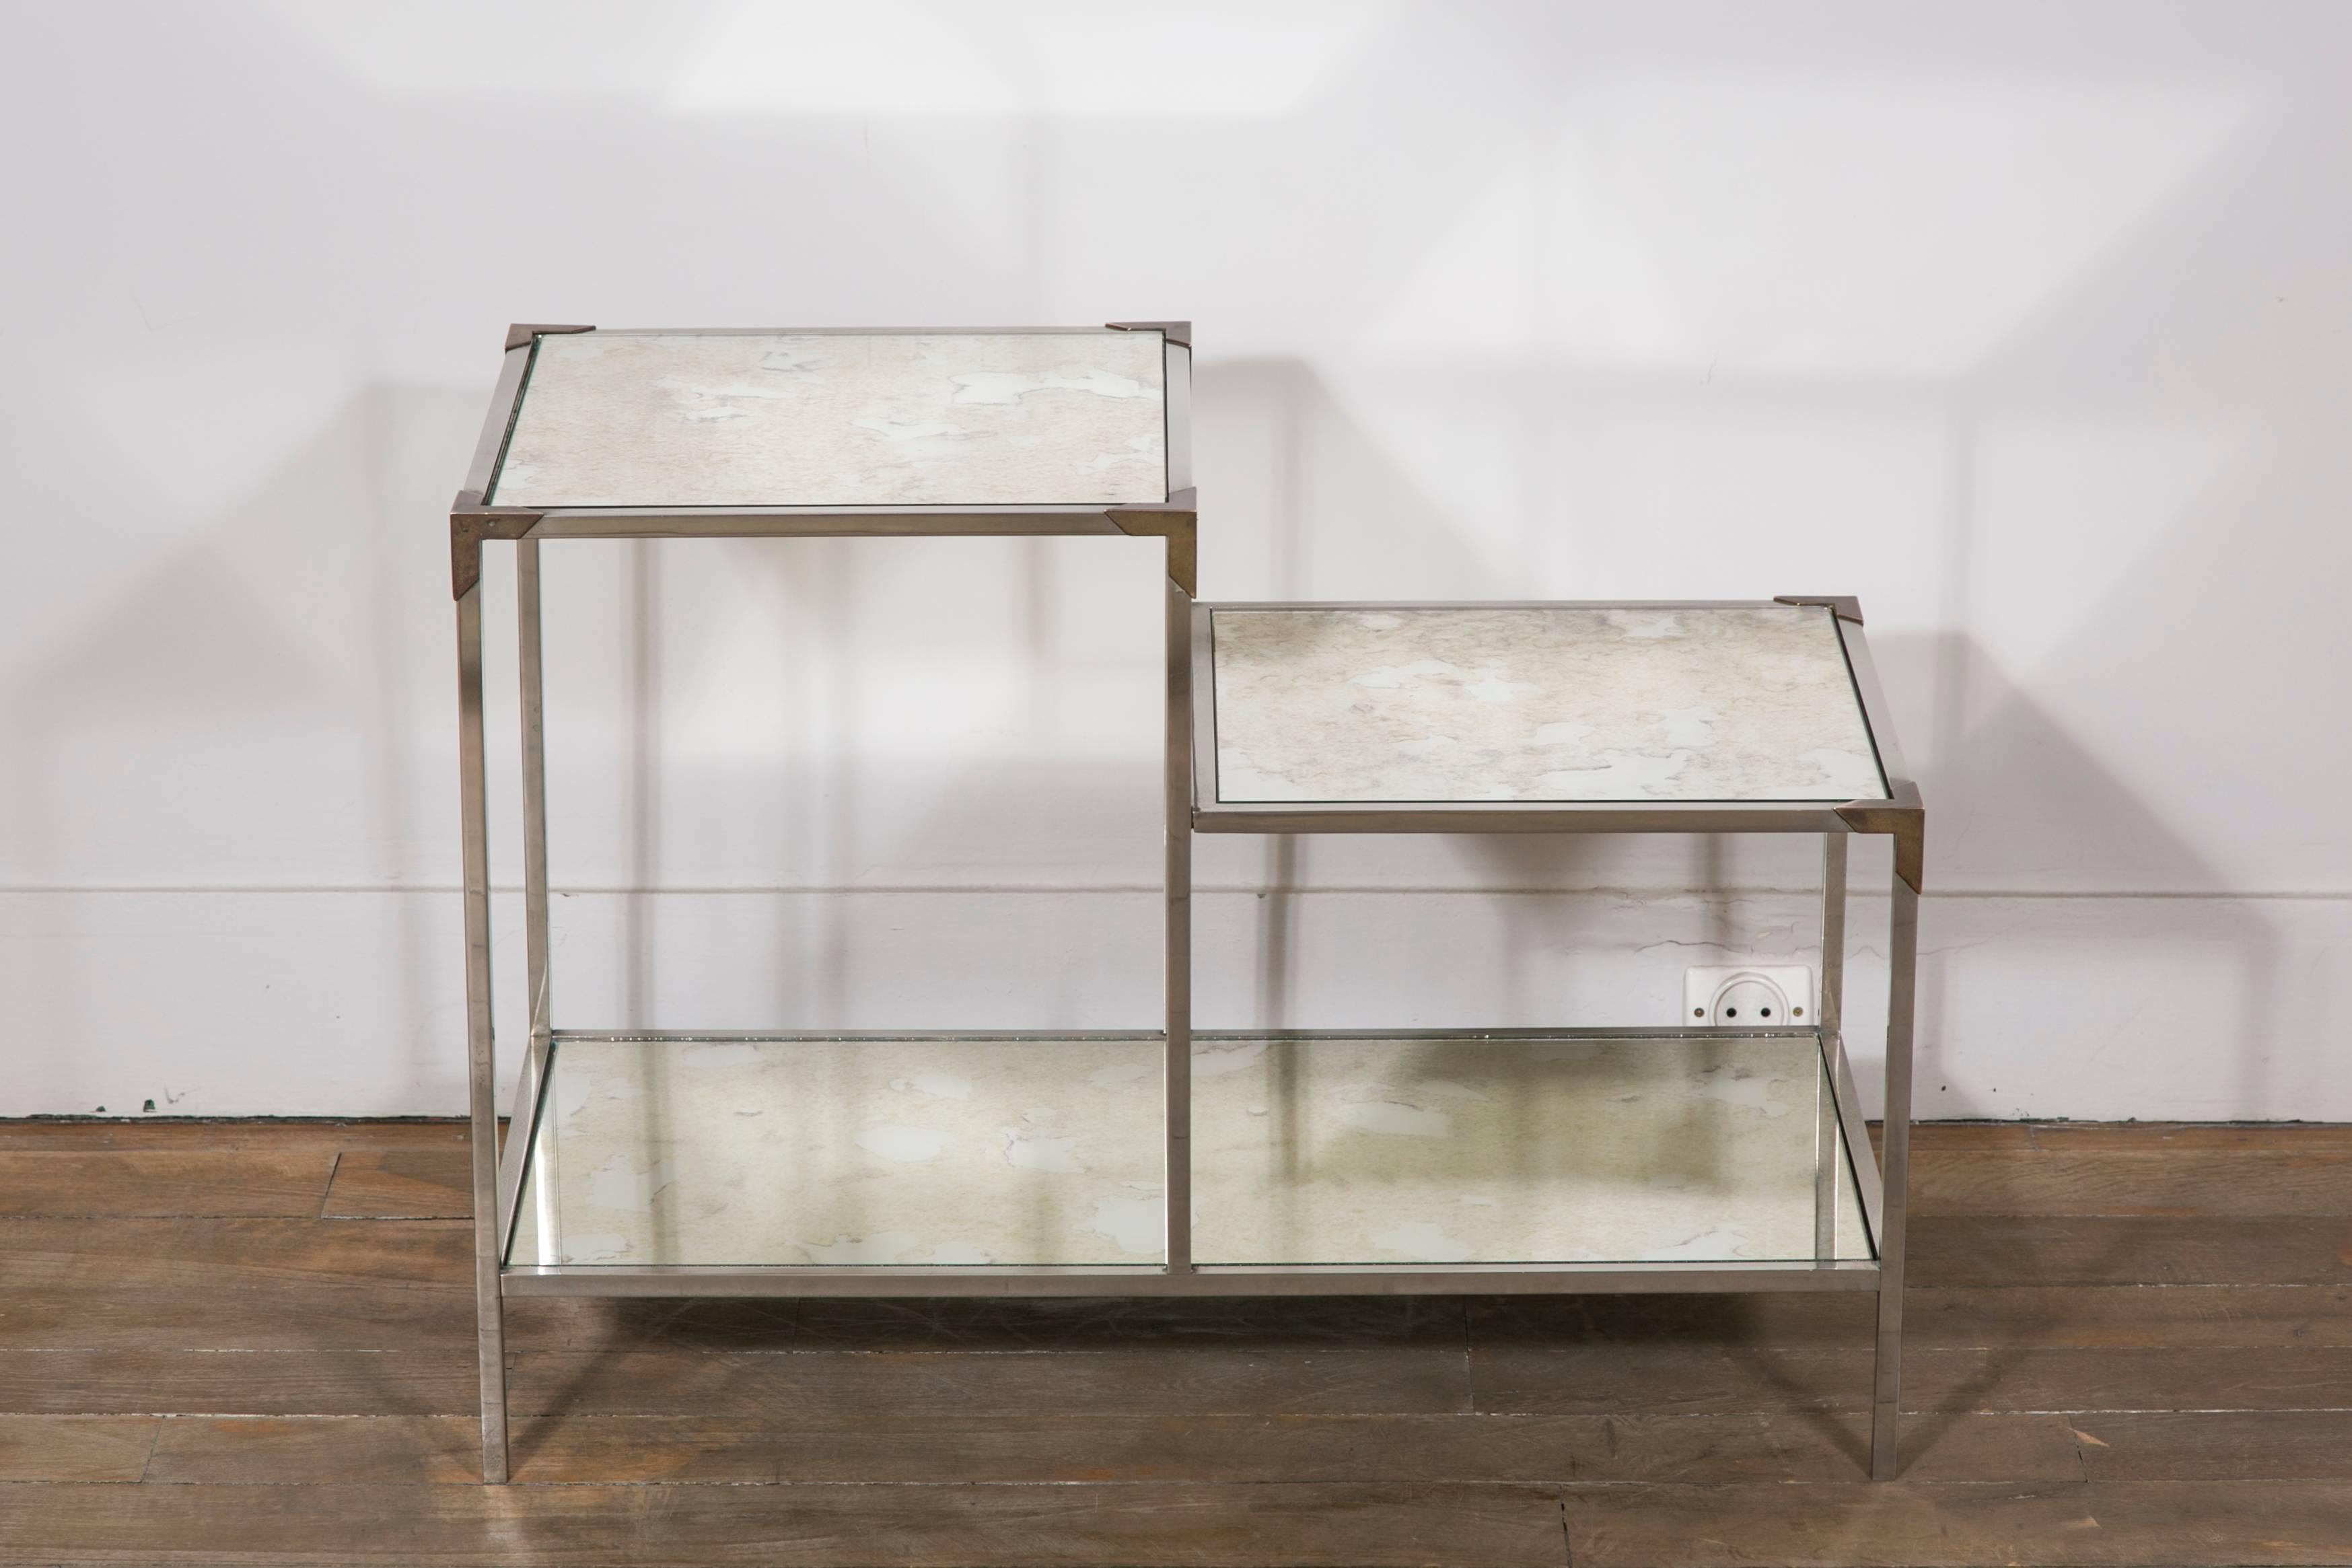 Pair of nickelled metal end tables, with mirrored tops and brass details.
France, 1960s.

Dimensions:
Height 50 cm / 19.68 inches.
Intermediary height 35 cm / 13.77 inches.
Length 70 cm / 27.55 inches.
Depth 35 cm / 13.77 inches.
 